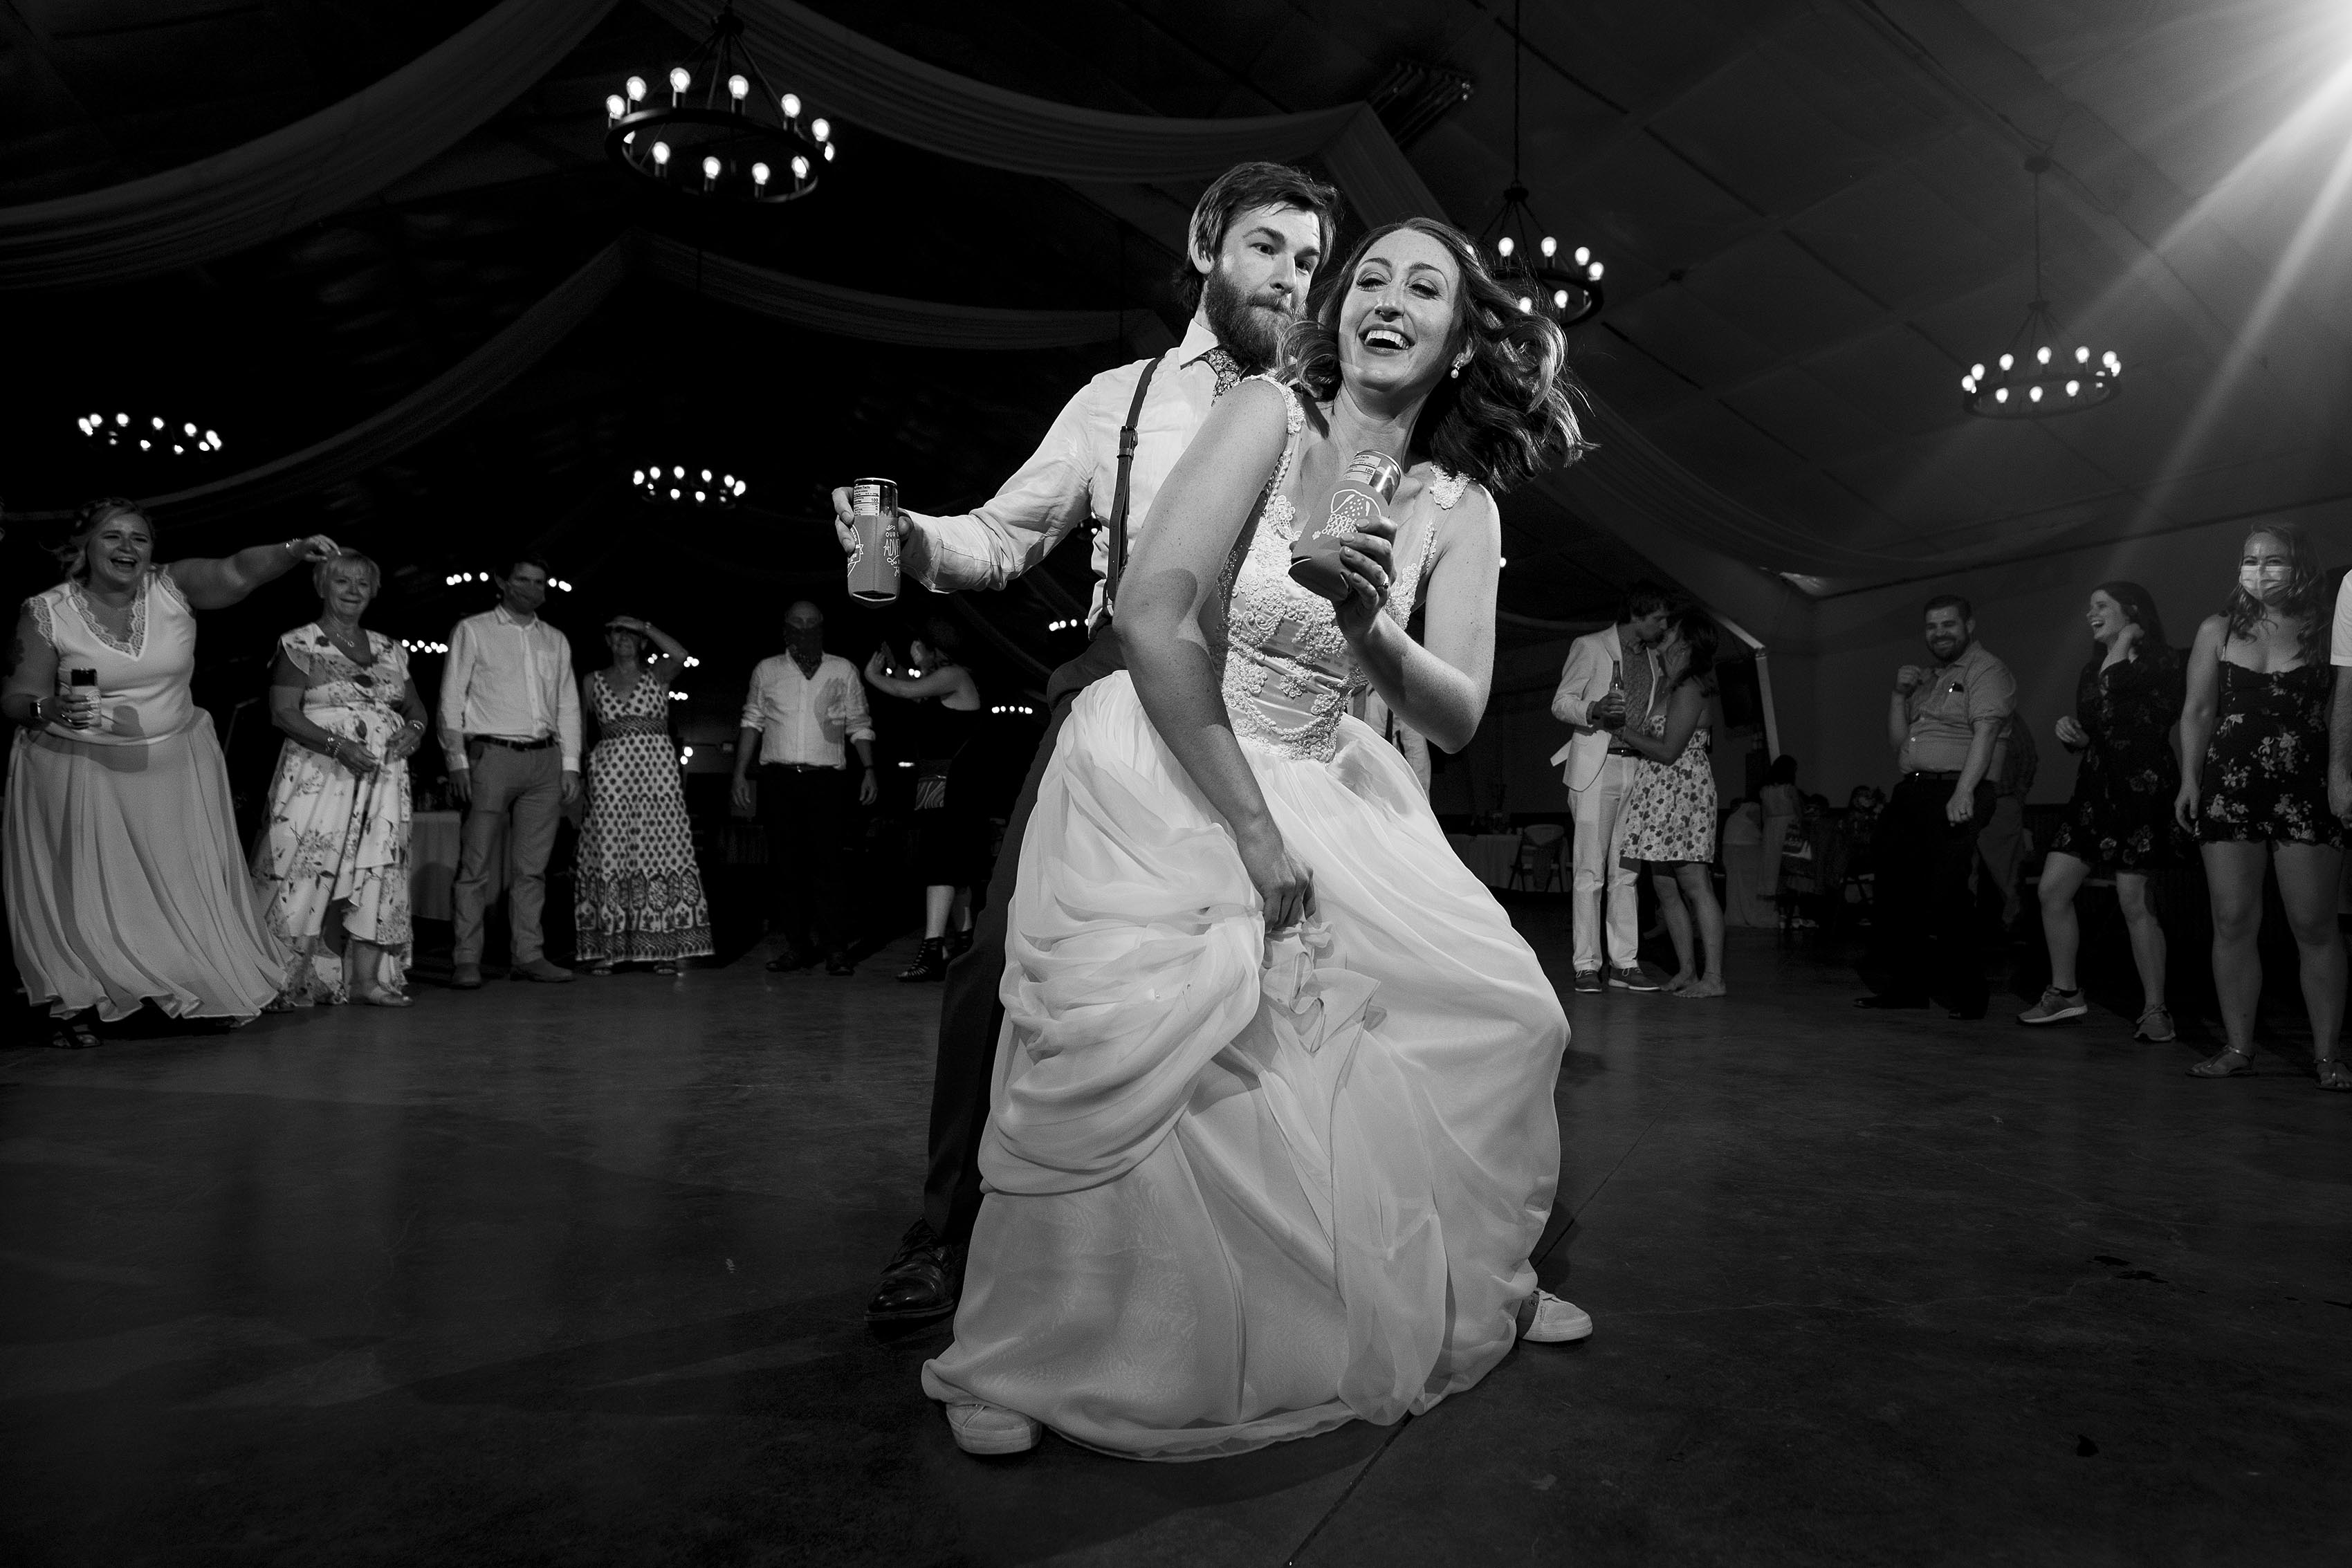 The bride and groom dance together at 4 Eagle Ranch during their wedding reception in Wolcott, CO